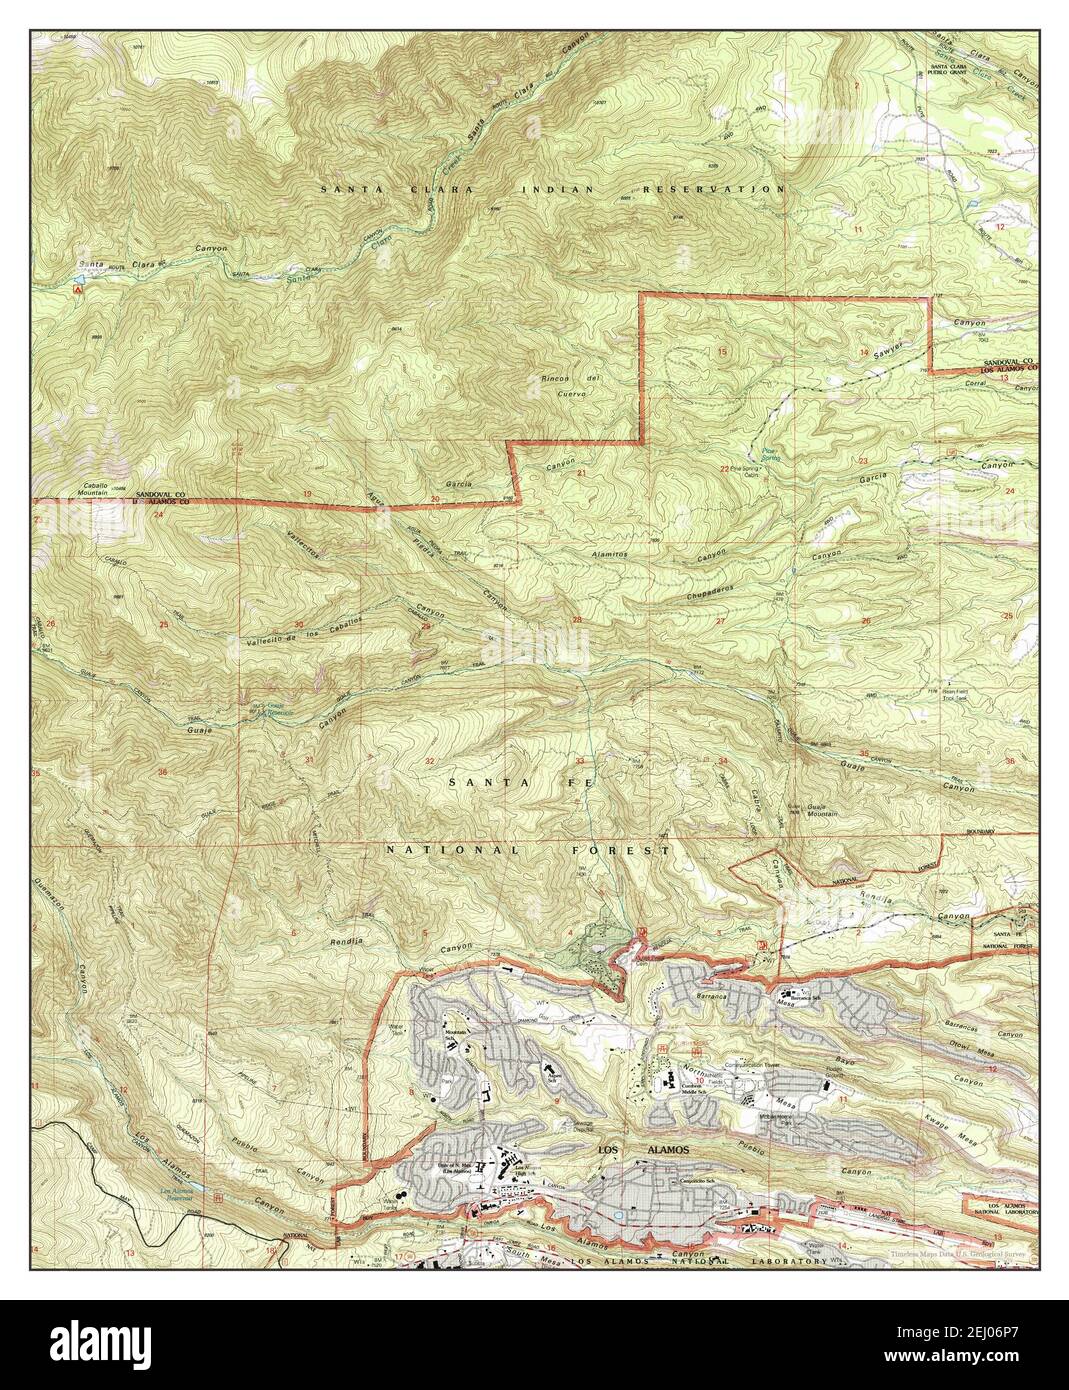 Guaje Mountain, New Mexico, map 2002, 1:24000, United States of America by Timeless Maps, data U.S. Geological Survey Stock Photo